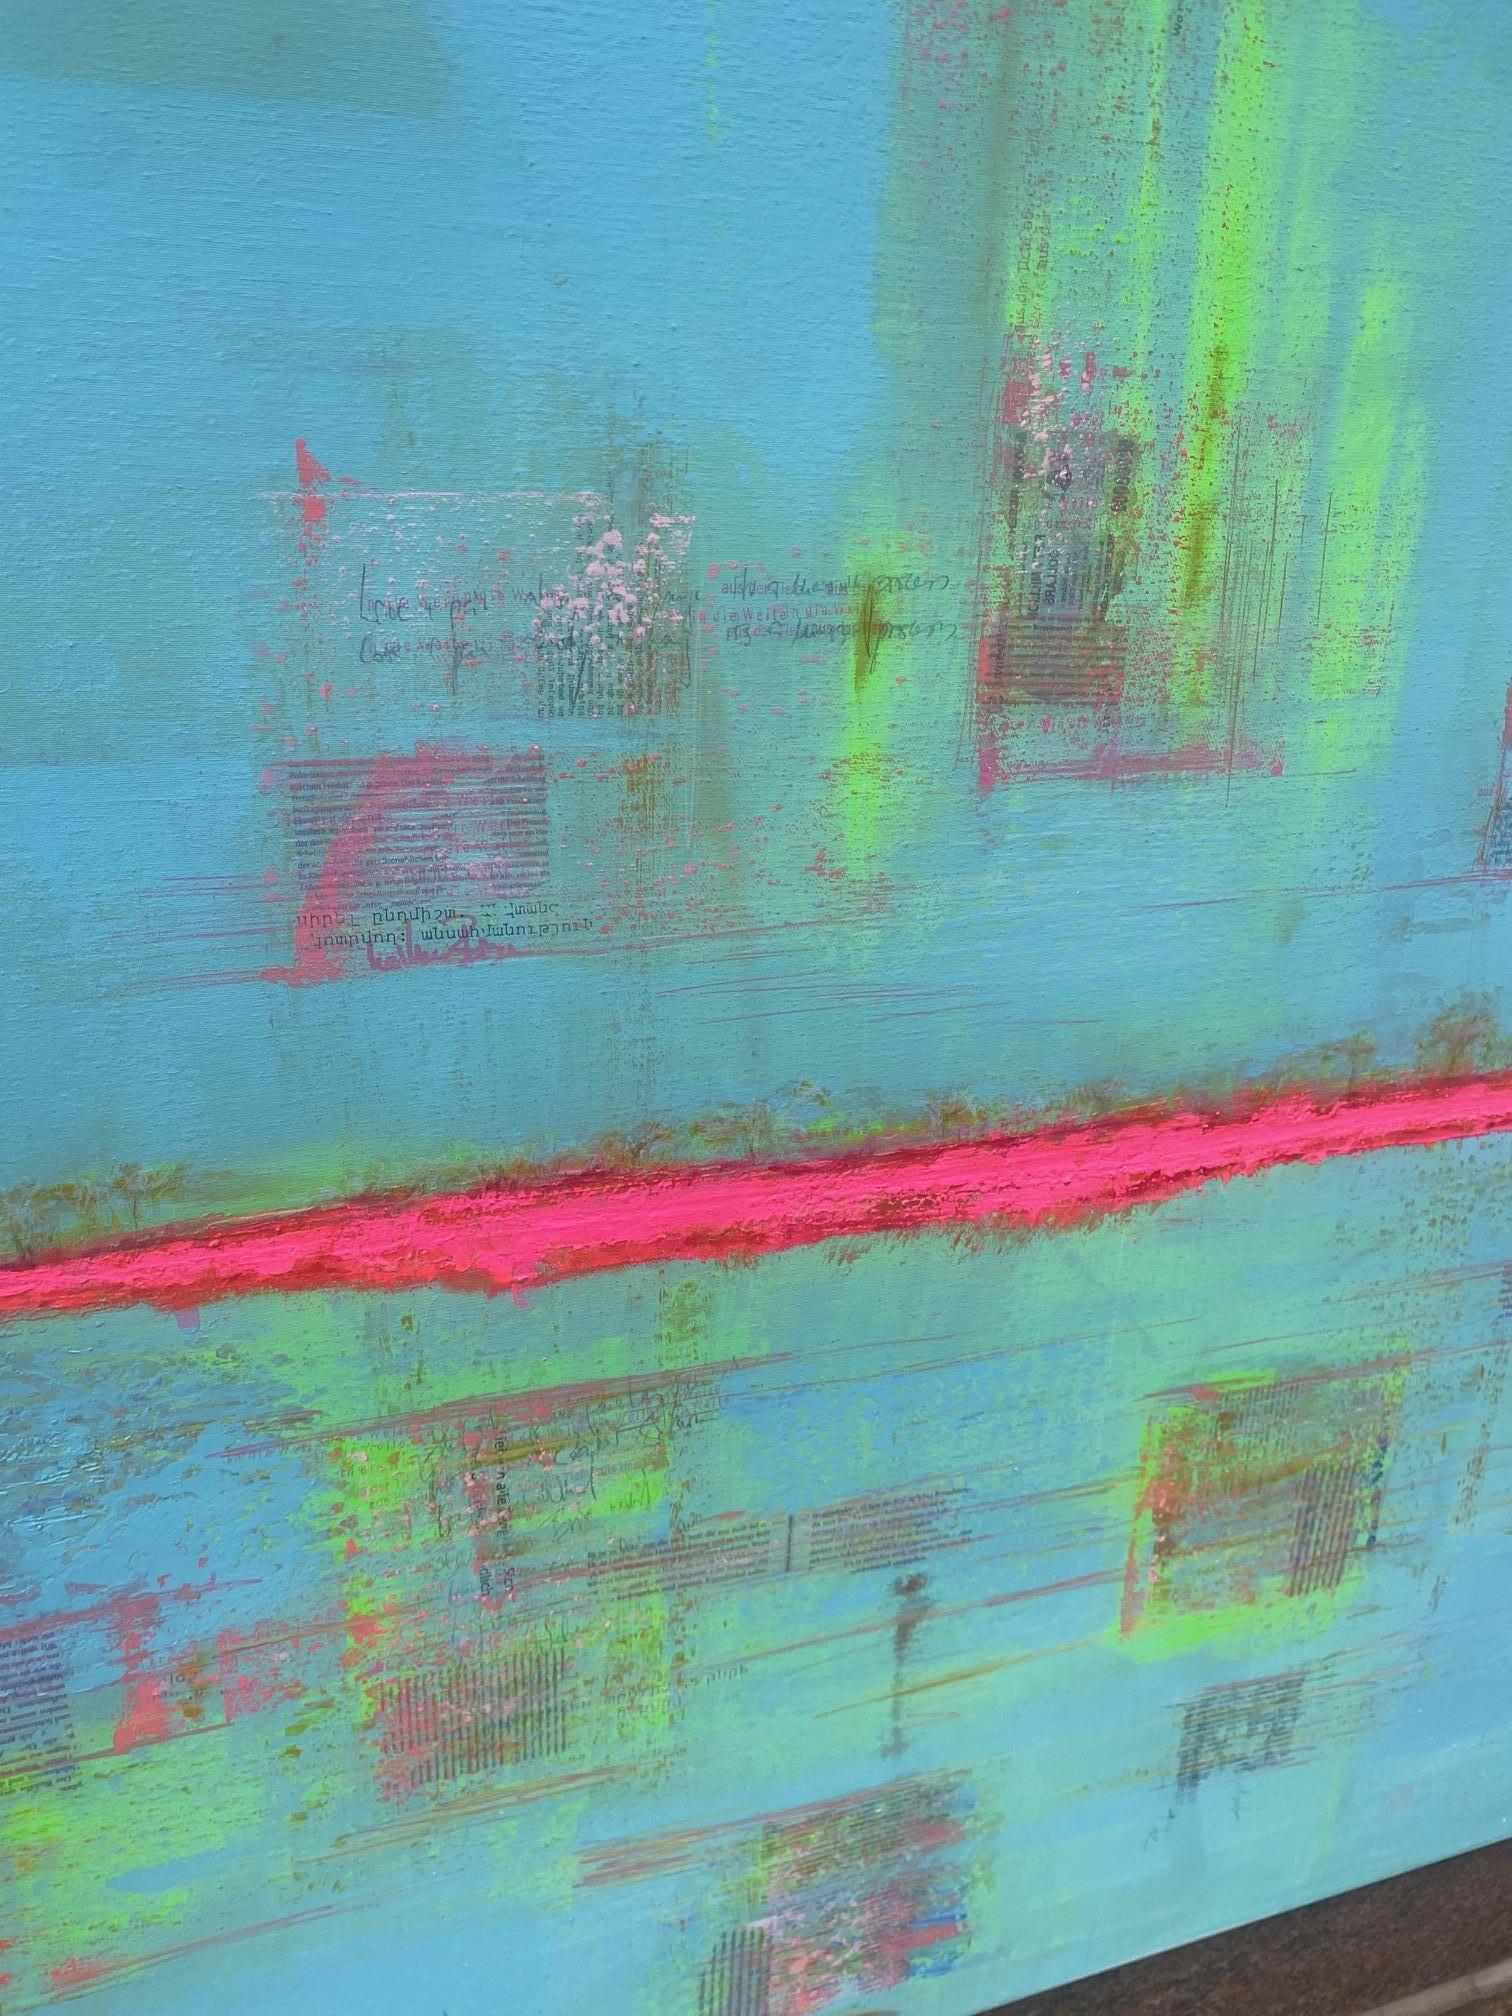 Thought & Meditation Nr. 2 - contemporary abstract luminescent color work - Contemporary Painting by Michael Pröpper